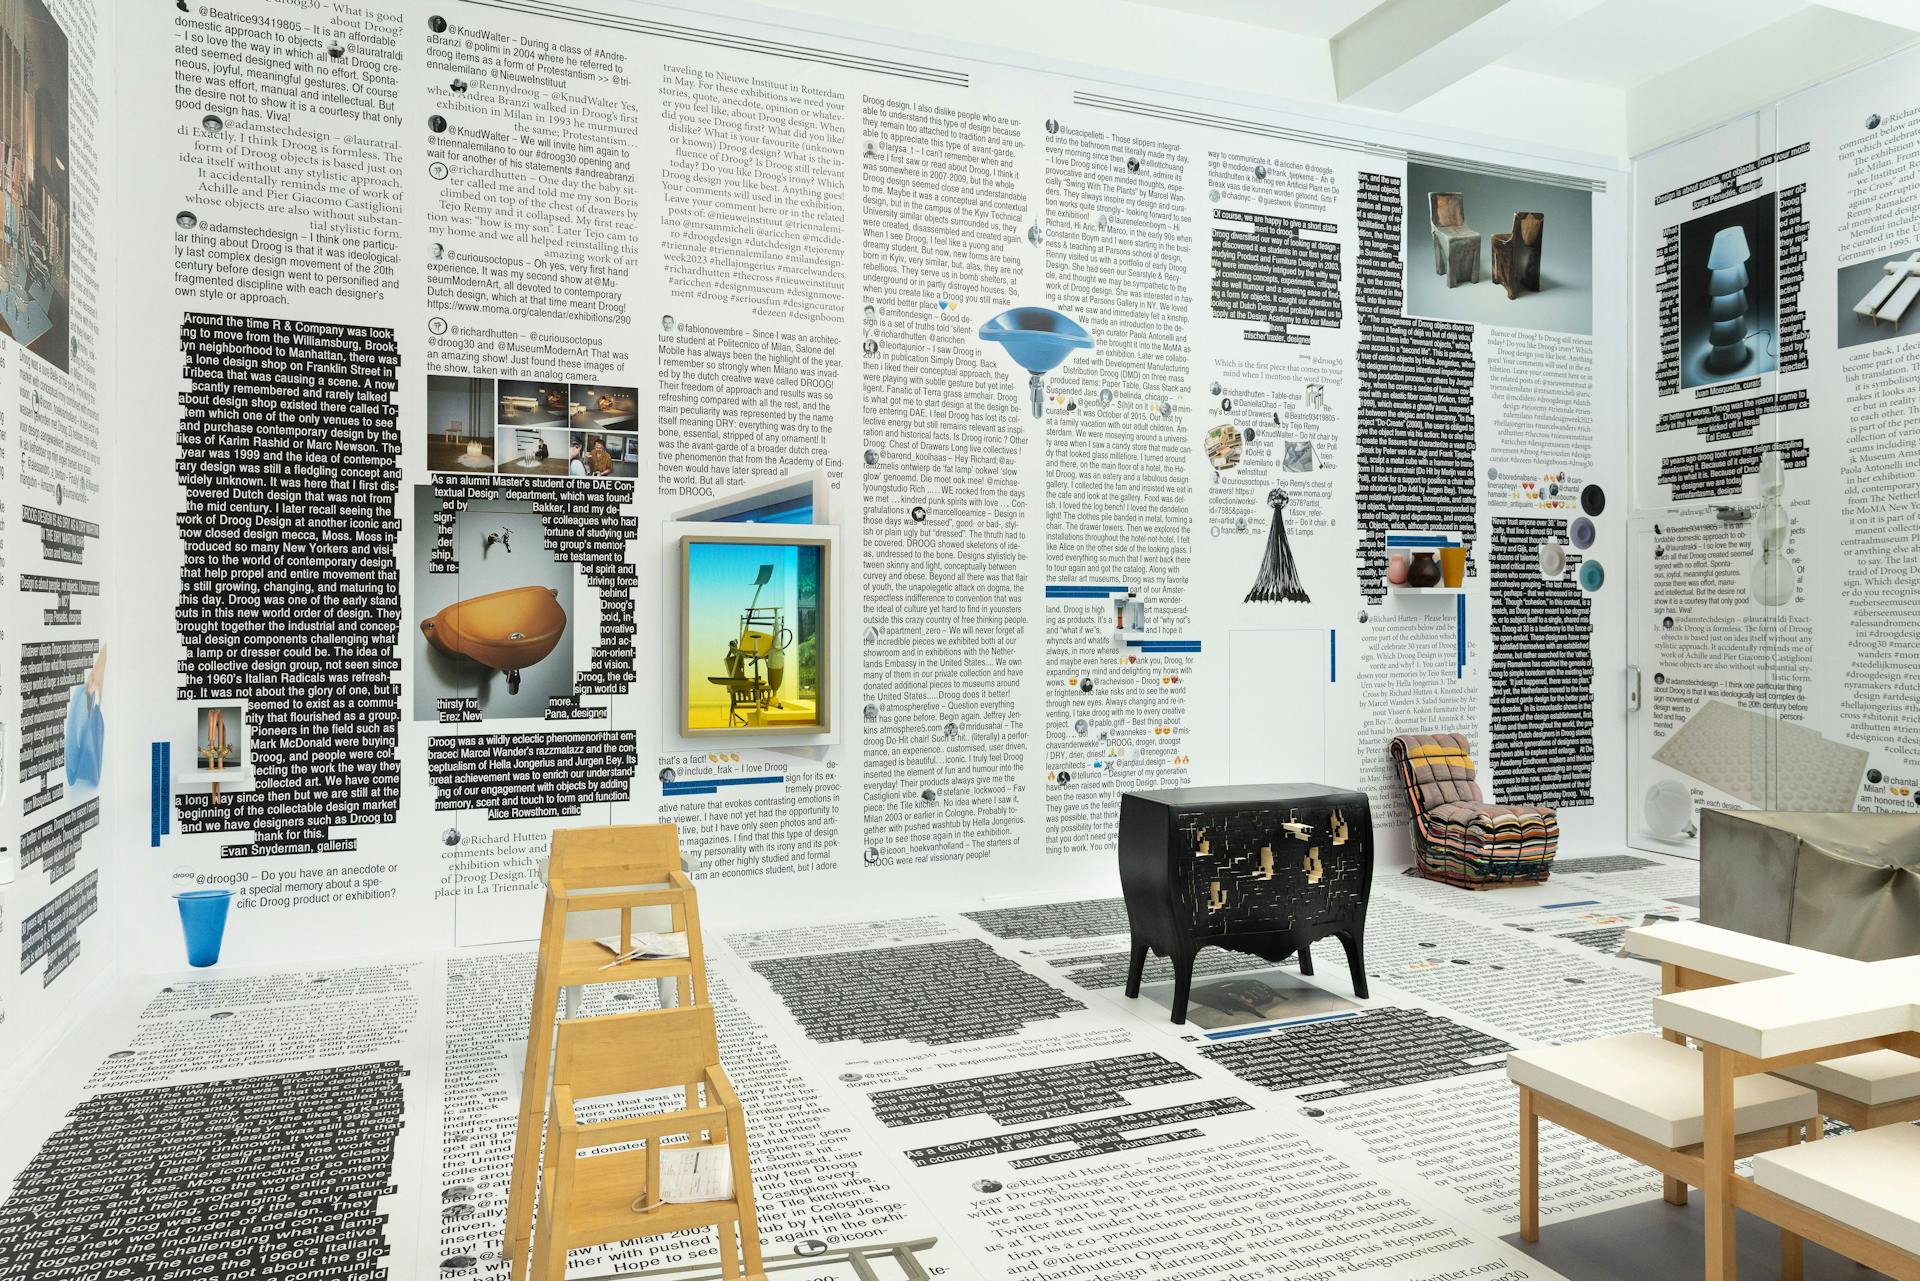 Photo of a square exhibition space. In the space there are several furniture objects with unconventional shapes and designs, including a bench, a chair and a cabinet. The walls and floor are in its entirety covered in texts in various fonts and colors.